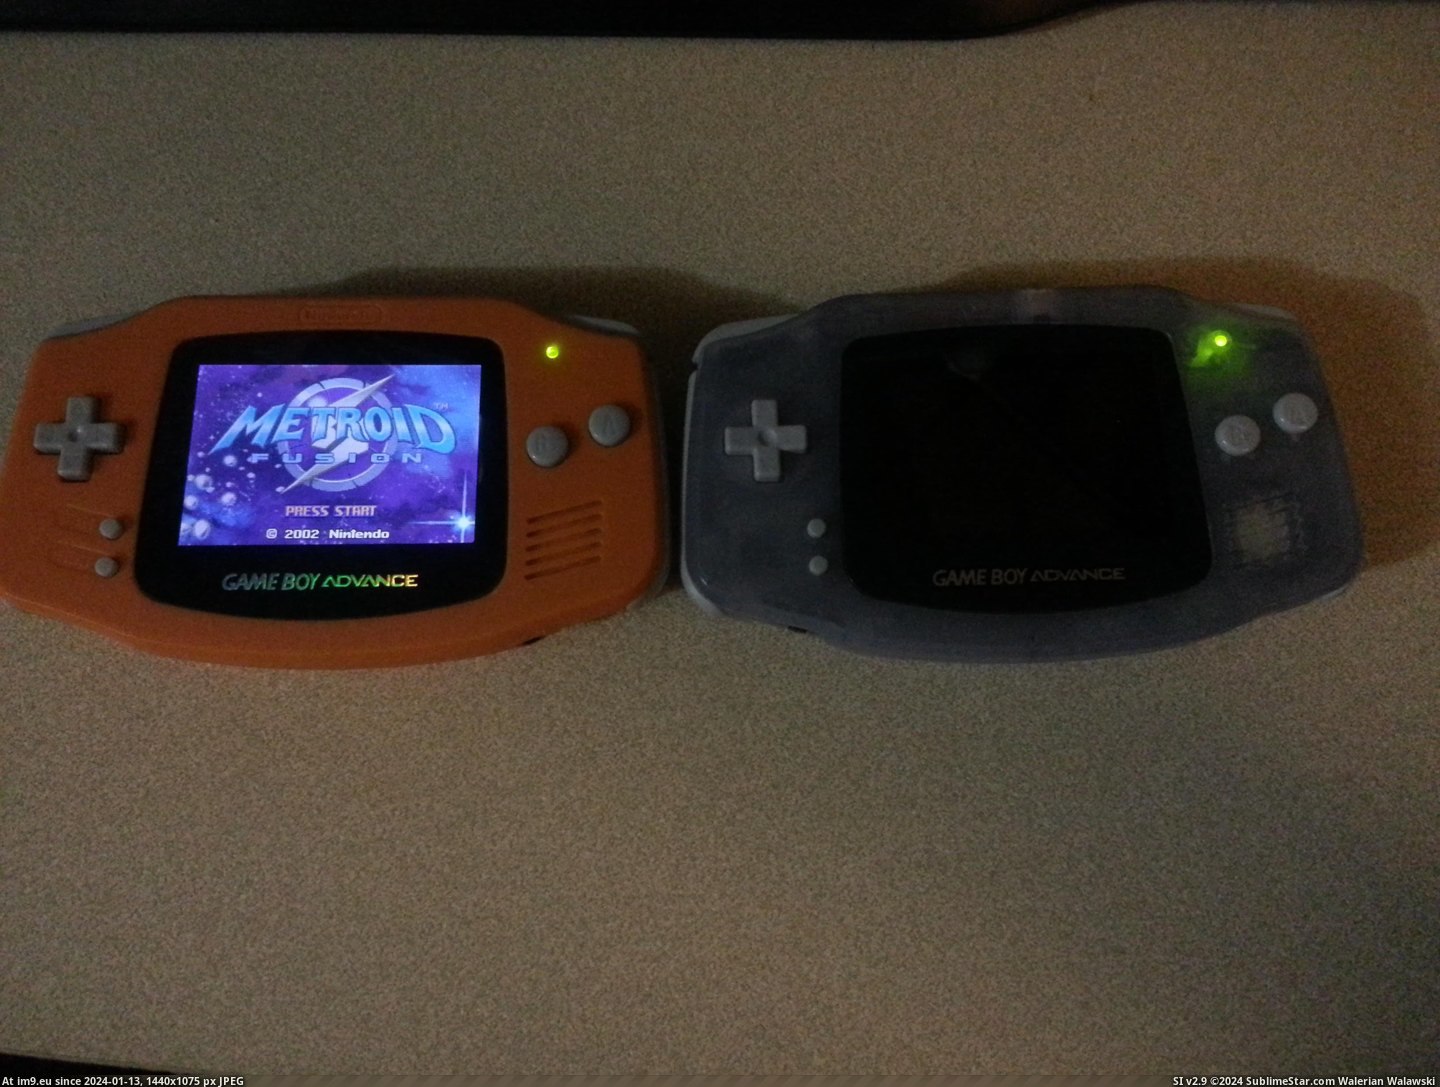 #Gaming #Happy #Finally #Kit #Gba #Backlight #Results #Received #Mod [Gaming] Finally received my GBA Backlight mod kit. So happy with the results! Pic. (Изображение из альбом My r/GAMING favs))